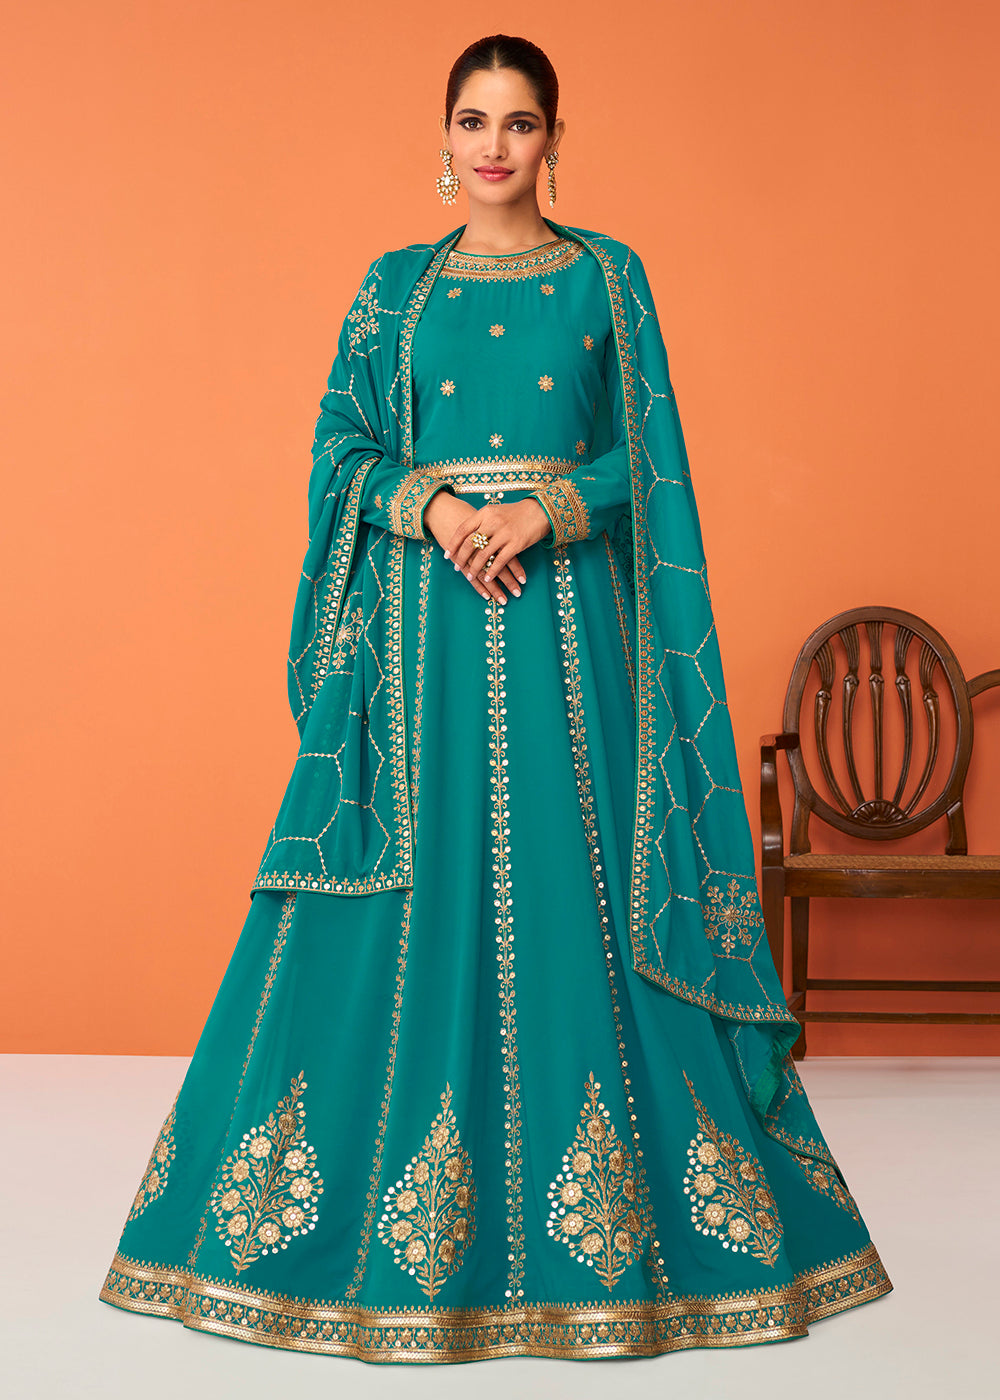 Buy Now Aqua Blue Festive Wear Embroidered Anarkali Suit Online in USA, UK, Australia, New Zealand, Canada & Worldwide at Empress Clothing. 